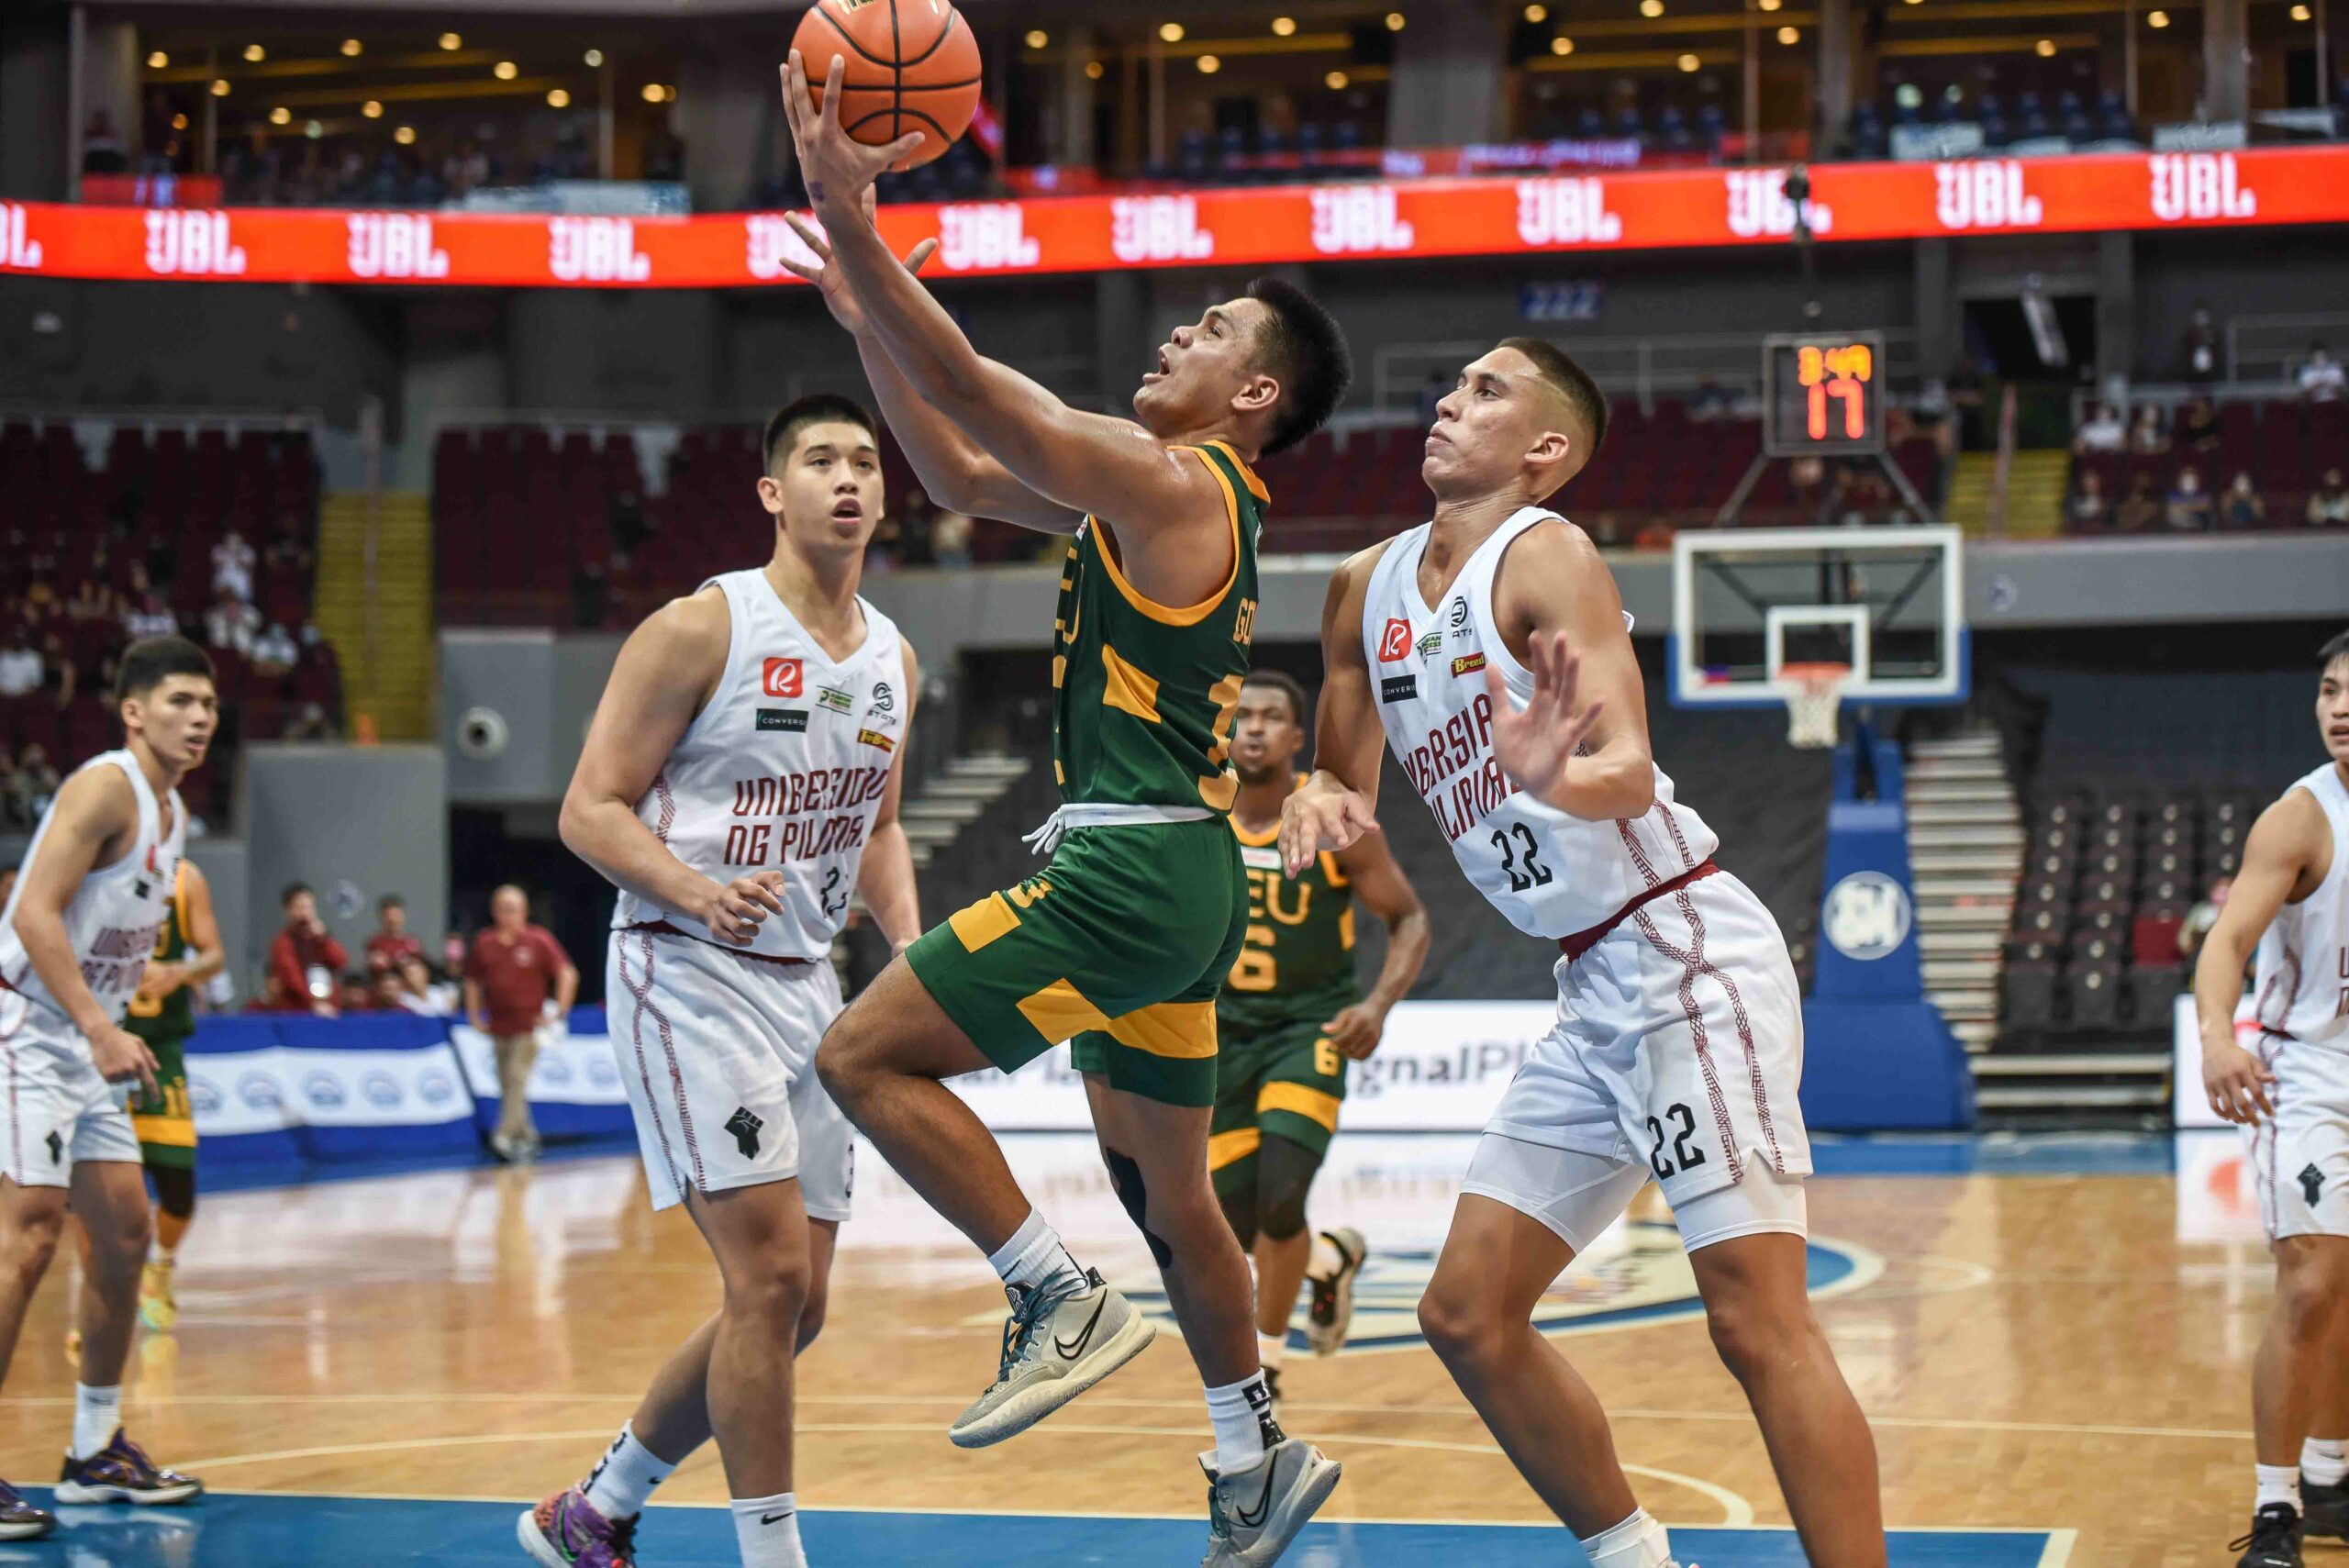 UAAP-84-Mens-Basketball-UP-vs-FEU-LJ-Gonzales-scaled The Short Corner: A look at the UAAP’s efficiency landscape heading into the Final Four ADMU AdU Bandwagon Wire Basketball DLSU FEU NU UAAP UE UP UST  - philippine sports news